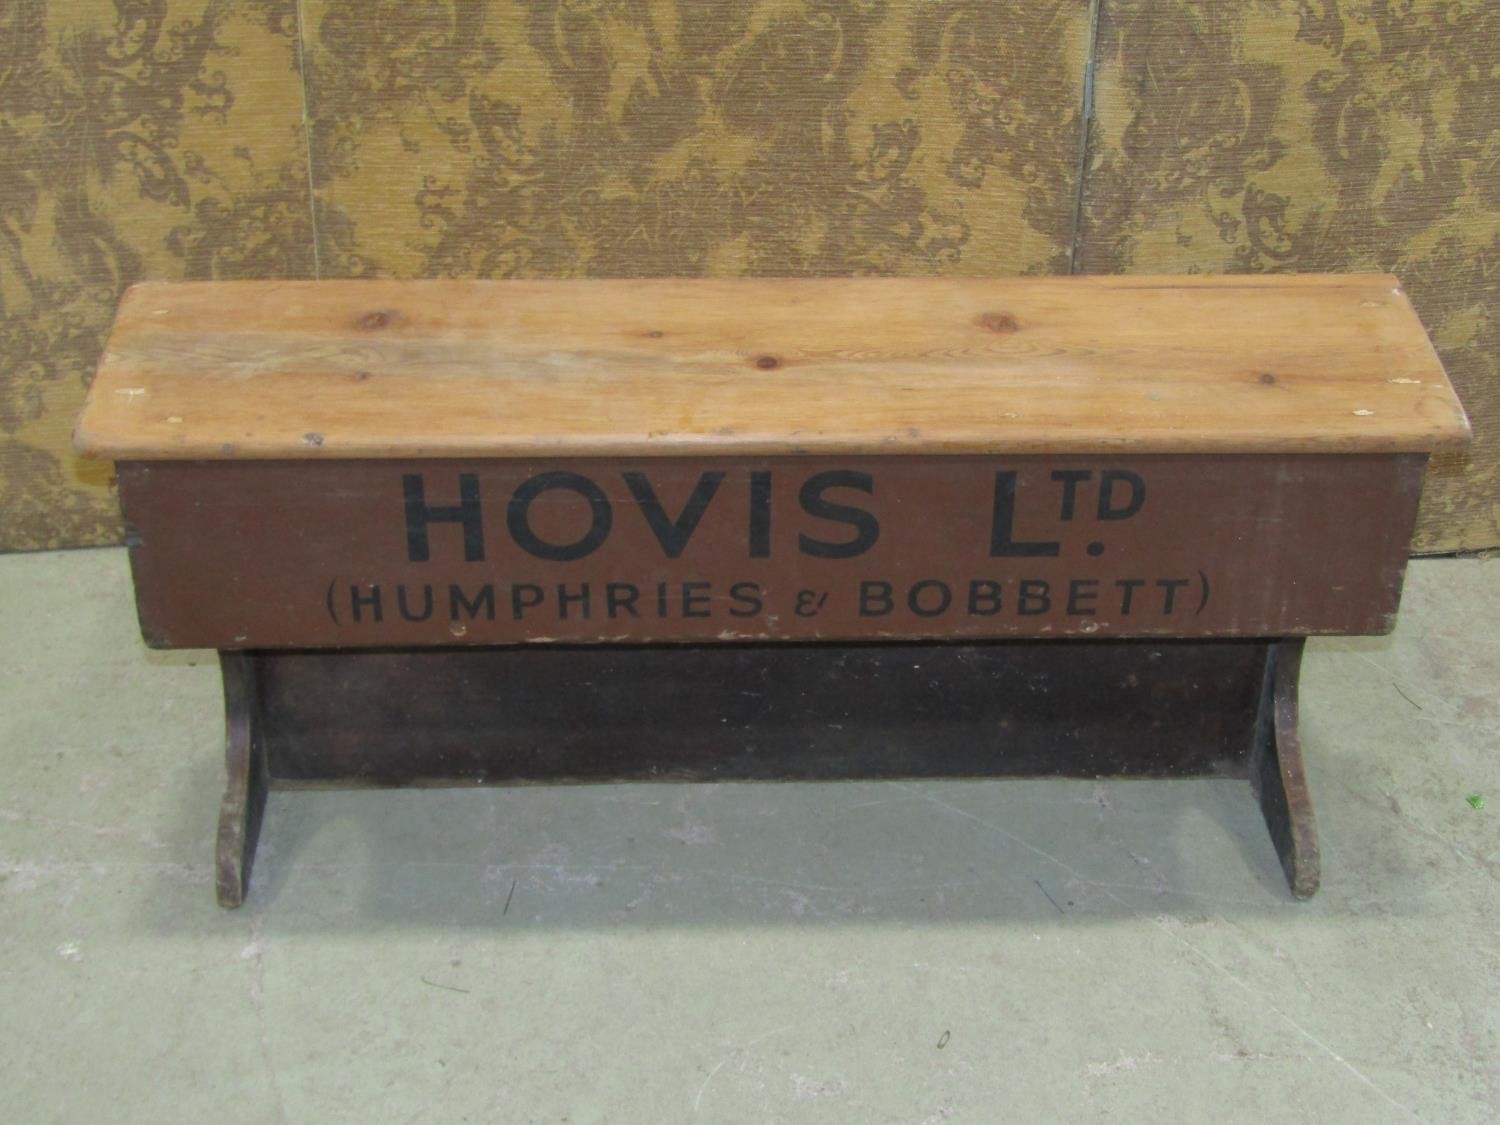 A vintage pine counter top enclosing a drawer with painted script 'Hovis Ltd' (Humphries &